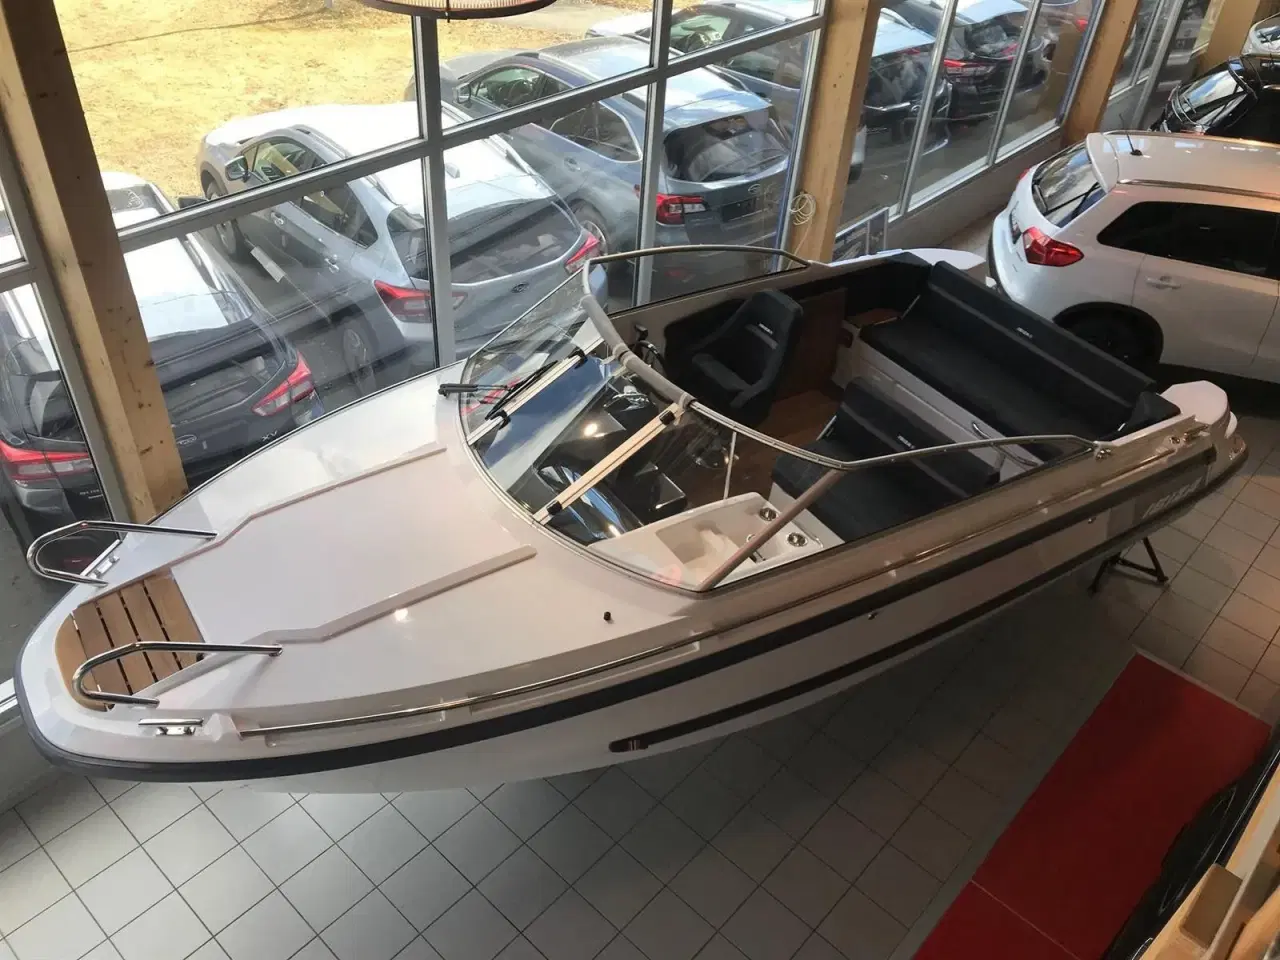 Billede 2 - Ny NORSK IBIZA 640T 140HK LUXUS